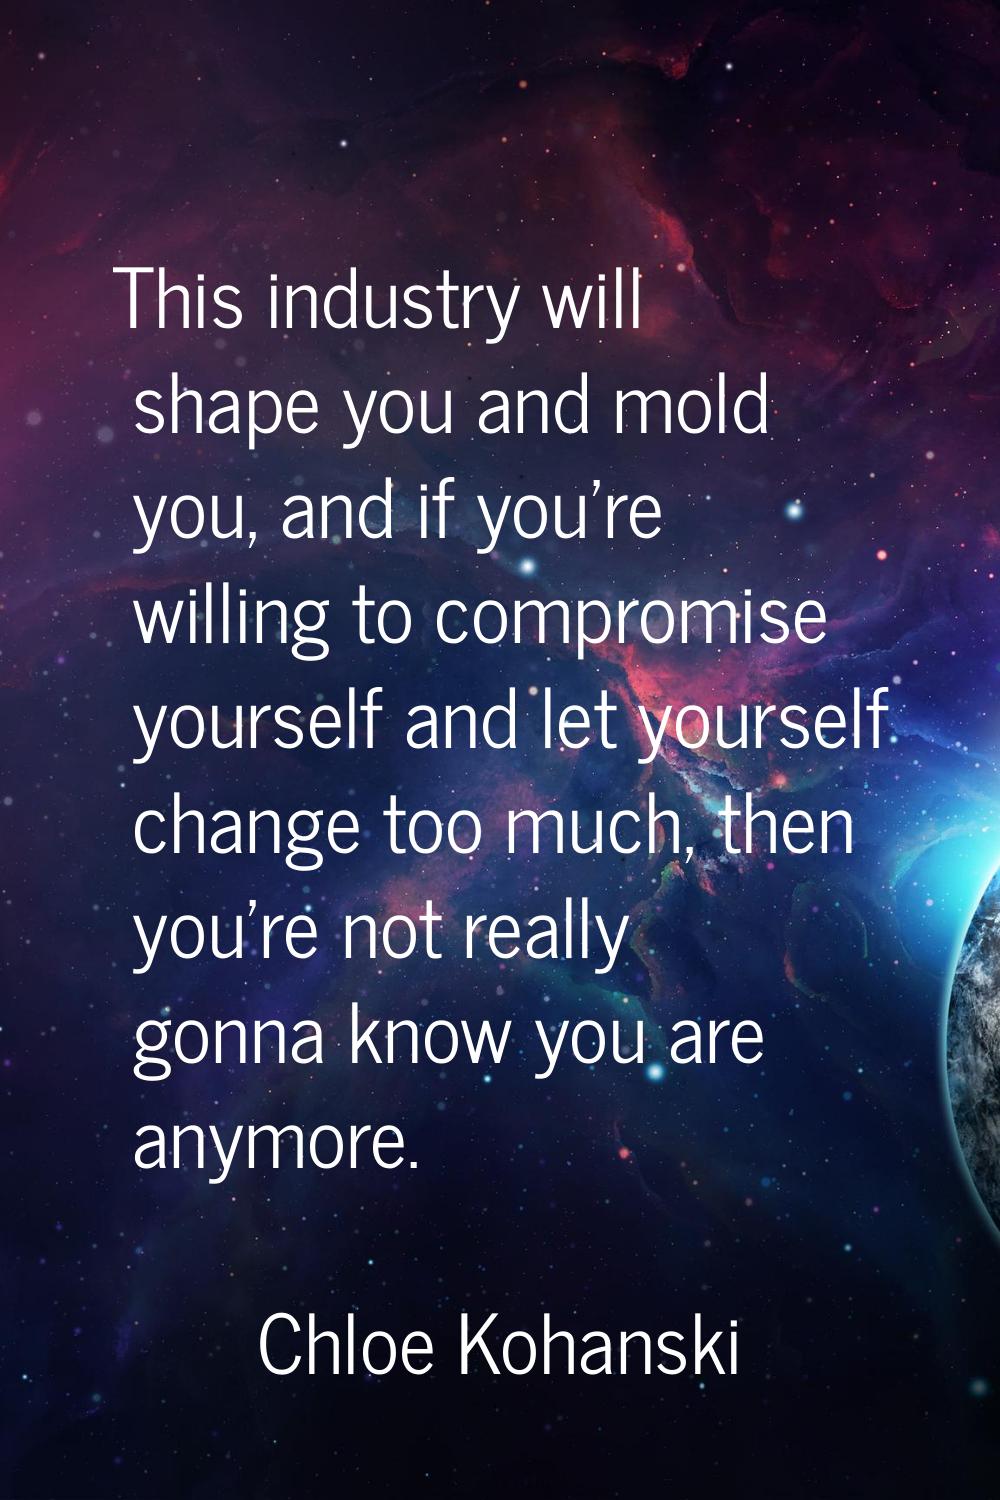 This industry will shape you and mold you, and if you're willing to compromise yourself and let you